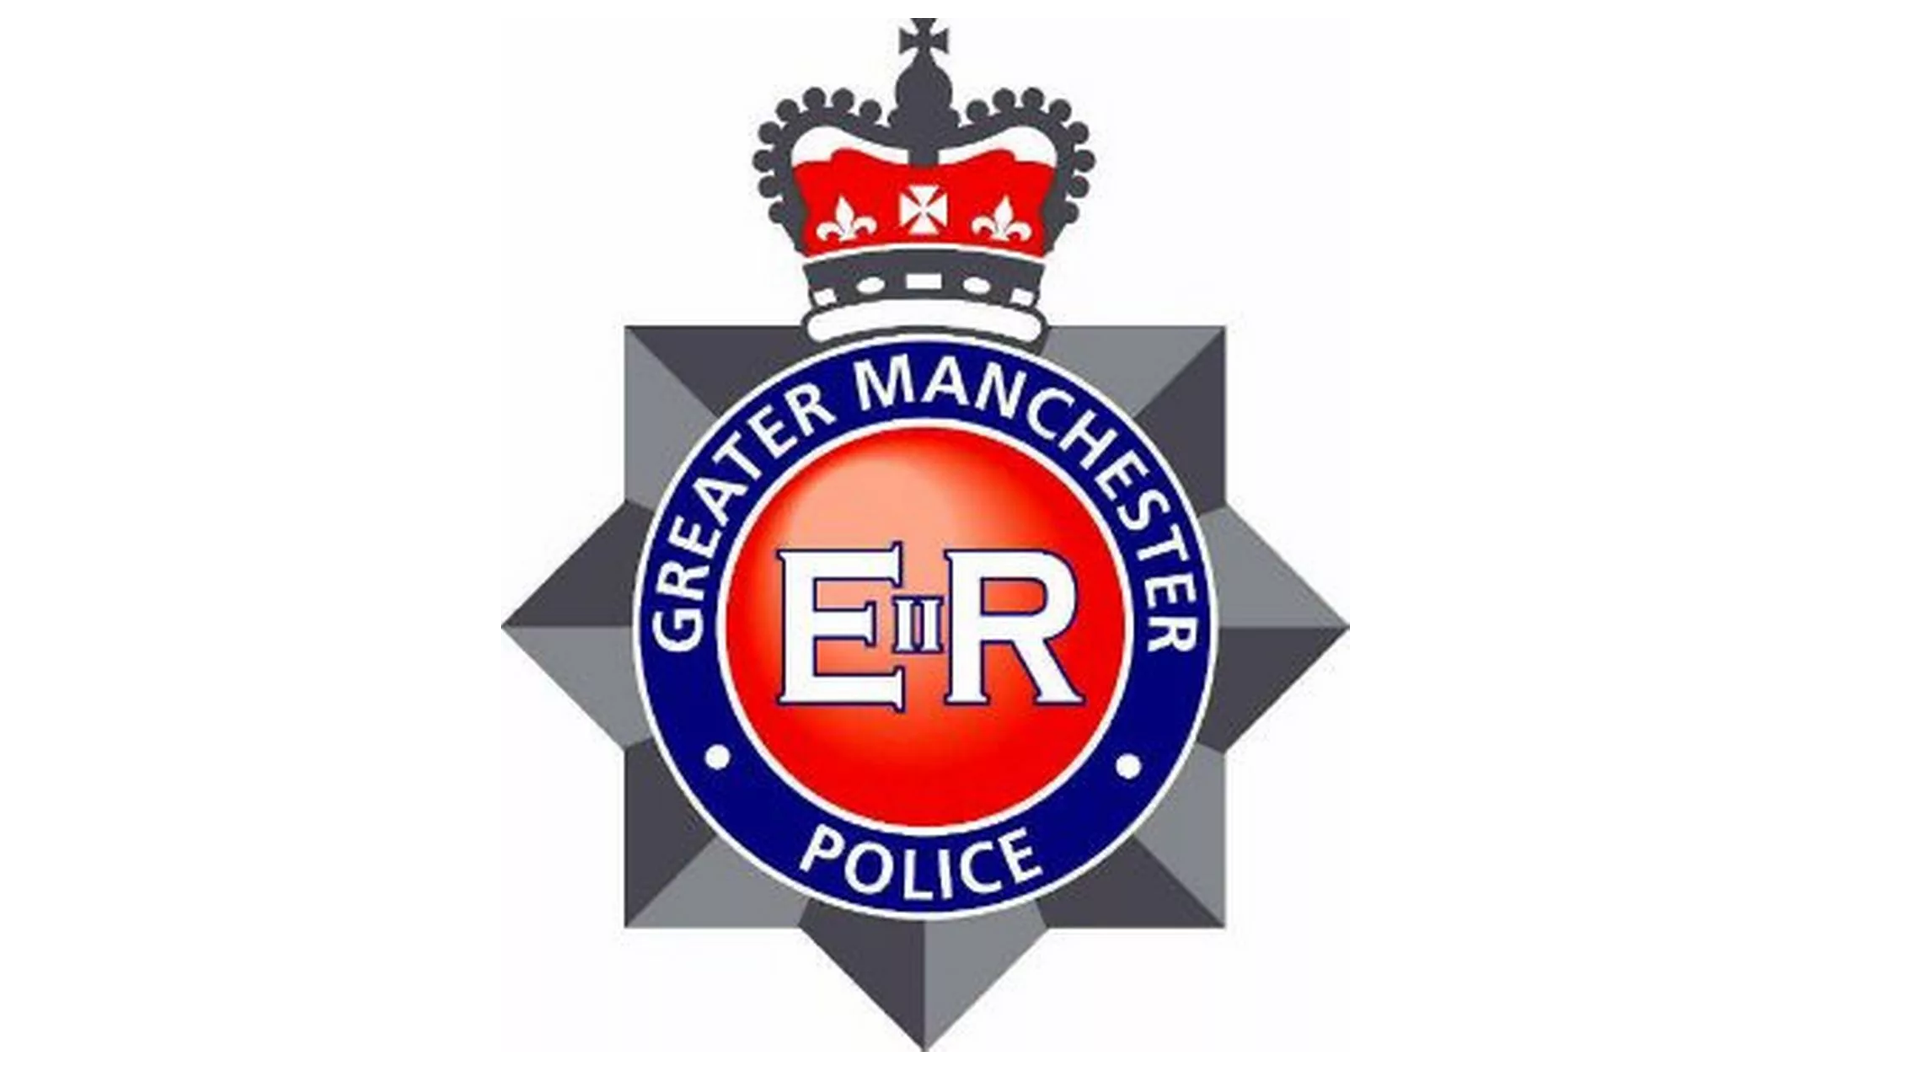 GMP holding public consultation event in Whalley Range